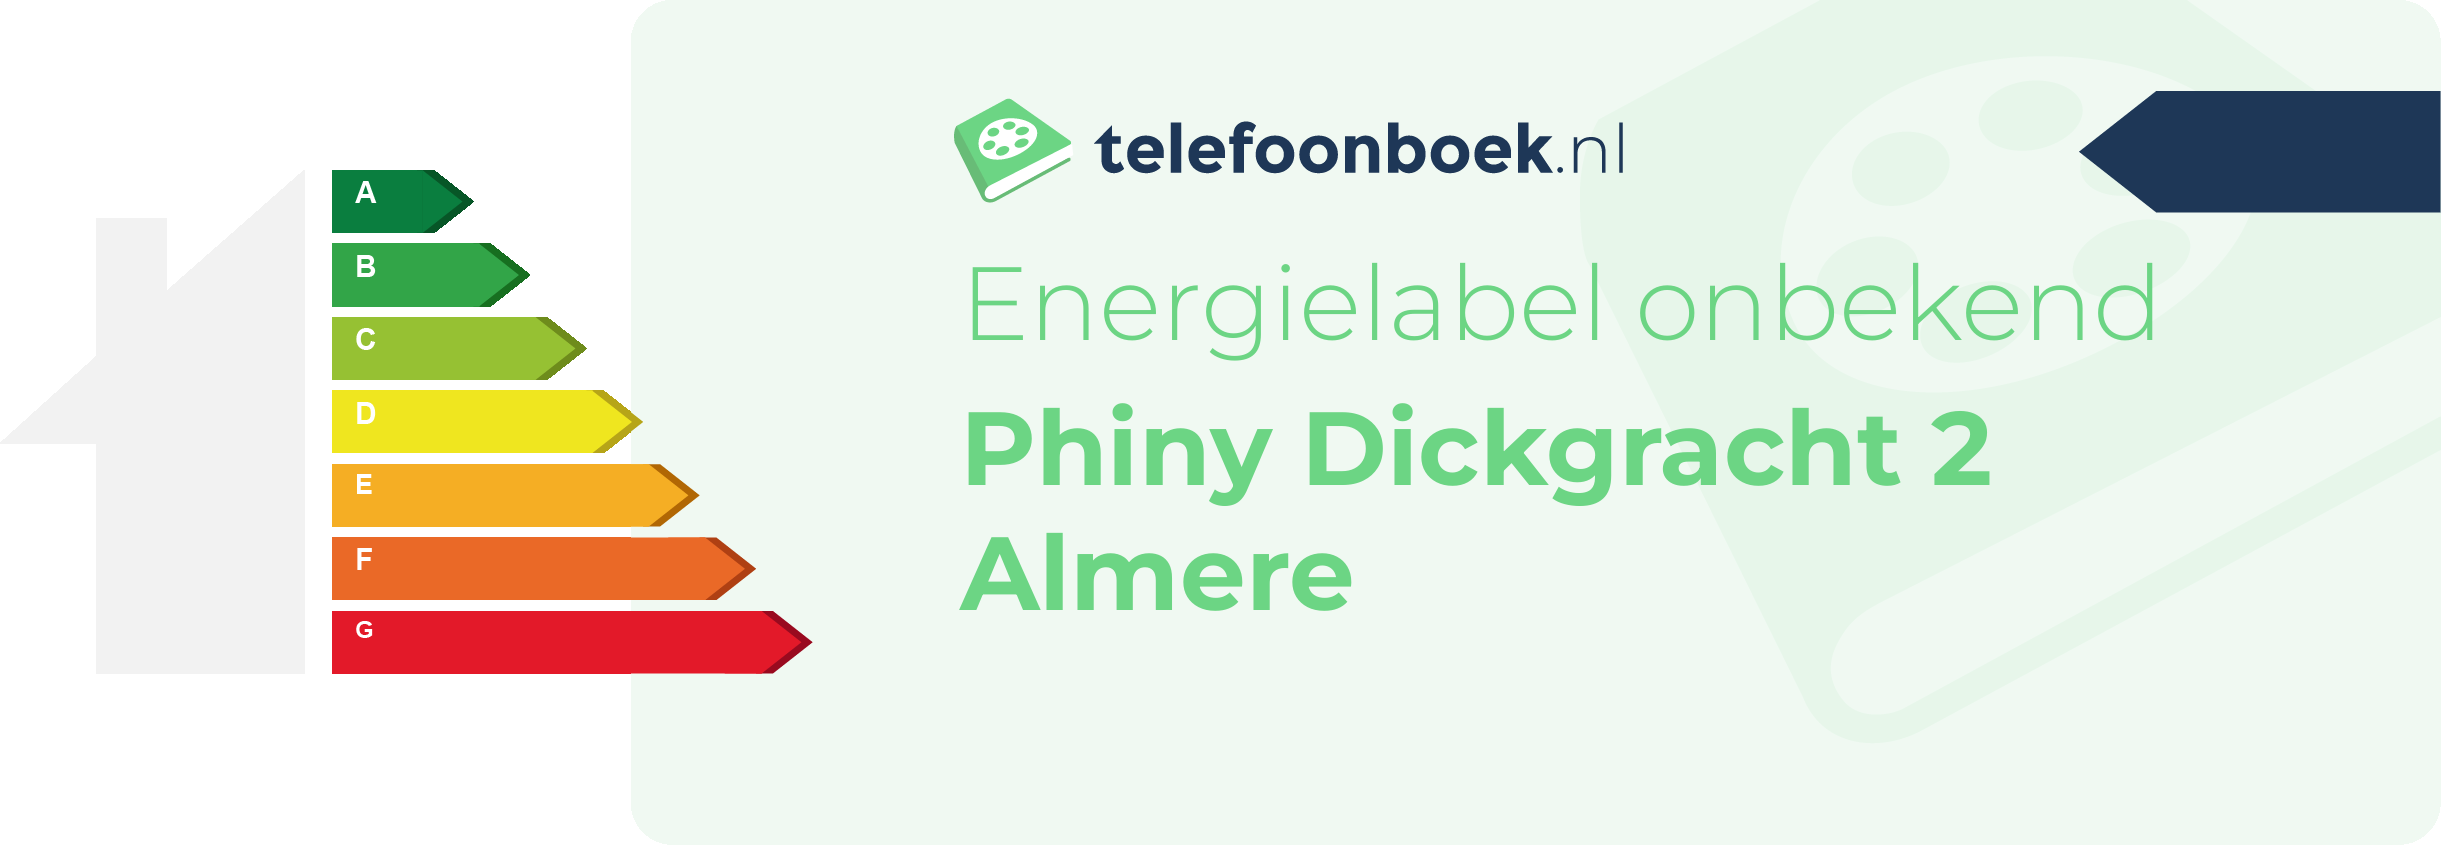 Energielabel Phiny Dickgracht 2 Almere